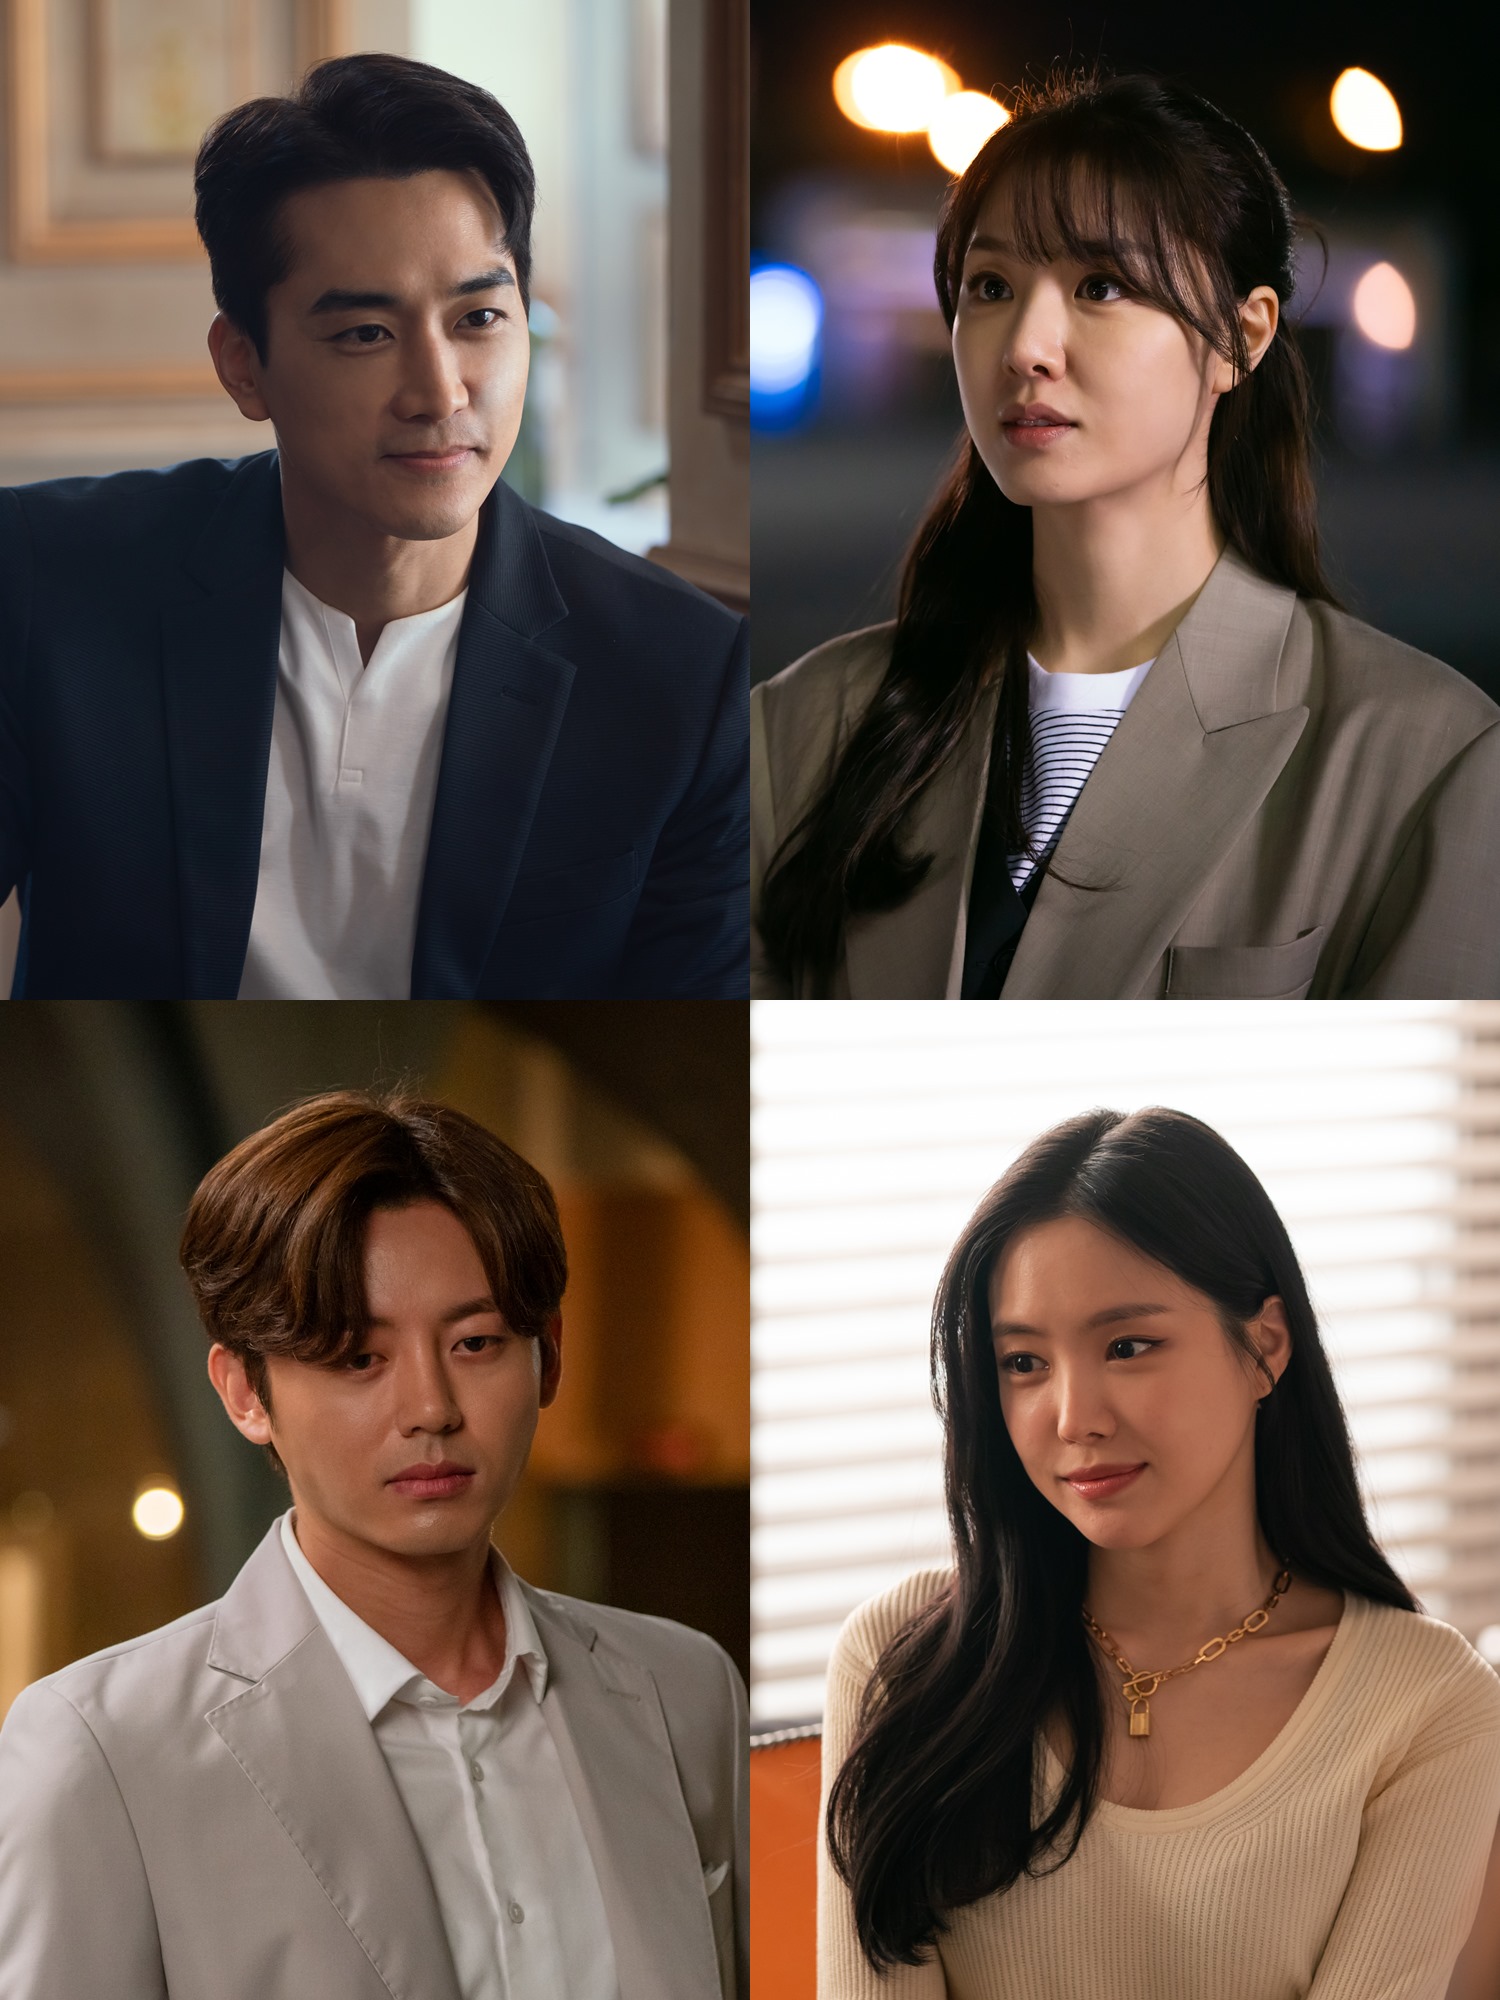 MBC New Moonwha Mini Series Ill Have You Like Dinner visits the house theater with the characters of various charms drawn by Song Seung-heon, Seo Ji-hye, Lee Ji-hoon and Son Na-eun.MBCs Ill Have You Like Evening, which will be broadcast first on the 25th, is a delicious one-meal romance comedy drama in which two men and women whose love feelings have been degraded due to the parting wounds and the solo culture will join together for dinner and fall into each others charm as if they were riding a thumb.The four-sided romance that can not take off the eyes further stimulates the curiosity about the main broadcast.Song Seung-heon, a psychiatrist specializing in food psychology, plays Min Hae-kyung, and shows a charm of reversal with a 2% lack of human beauty, unlike shining visuals.Unlike the harsh charisma that comes out of his eyes, Kim Hae-kyung will focus his attention on the unexpected warm and delicate aspect.He lost his love feelings due to his past wounds, and his first love and new relationship appeared at the same time, and the story development that can not be seen is anticipated.Seo Ji-hye of the web video channel 2NBOXs Peedy Udohee captures the attention with the appearance of not knowing where to go as the planner of the bottle taste content.Even if you rush in front of love, you are shocked once and turn 180 degrees.From a cheerful youthful aspect to an unexpected toughness, Seo Ji-hye is in an unpredictable relationship with Song Seung-heon (played by Kim Hae-kyung) for a fateful meal.It shows a romance that is boring while showing off the chemistry that can not be known whether it is a thumb or a squat.As such, the entangled and uncanny square relationship of four main characters such as Song Seung-heon, Seo Ji-hye, Lee Ji-hoon, and Son Na-eun, and the charm of four-color four-colored four-color are thrilling the prospective viewers.iMBC Cha Hye-mi  Photos